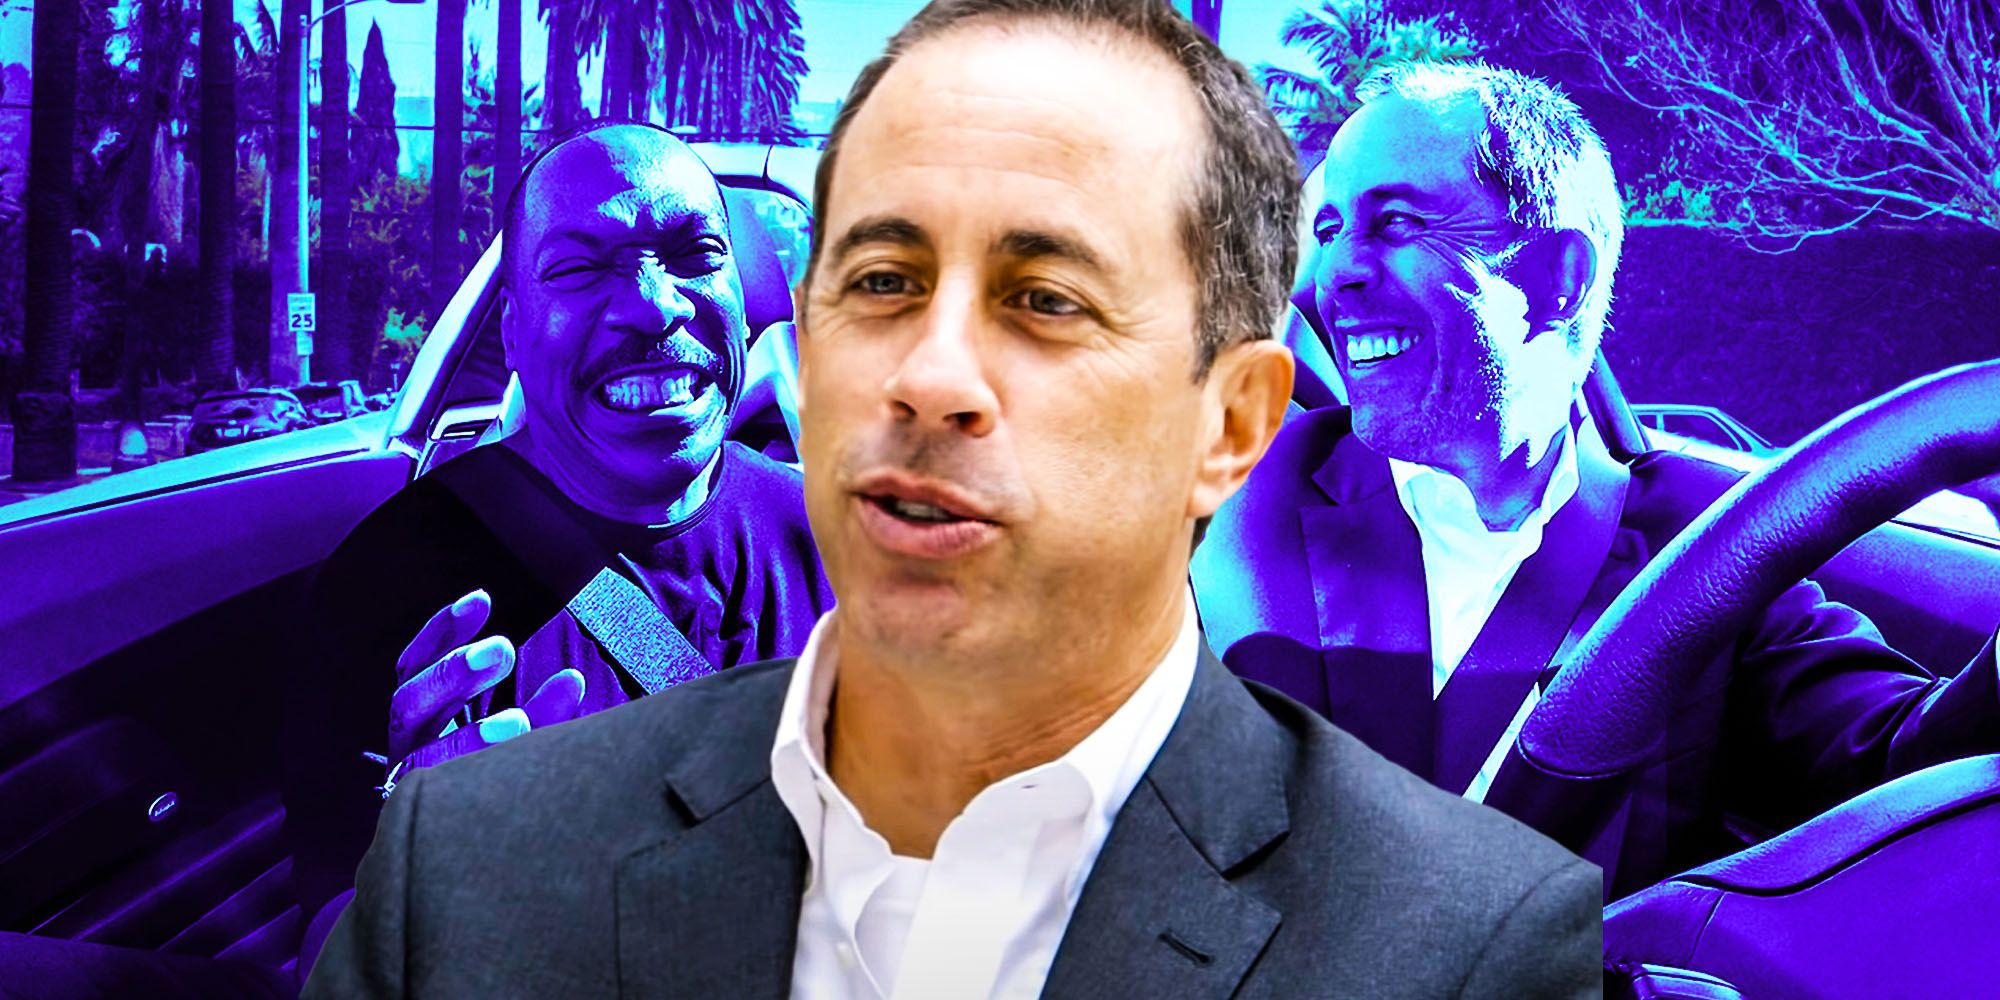 Comedians in cars getting coffee season 12 ever happen